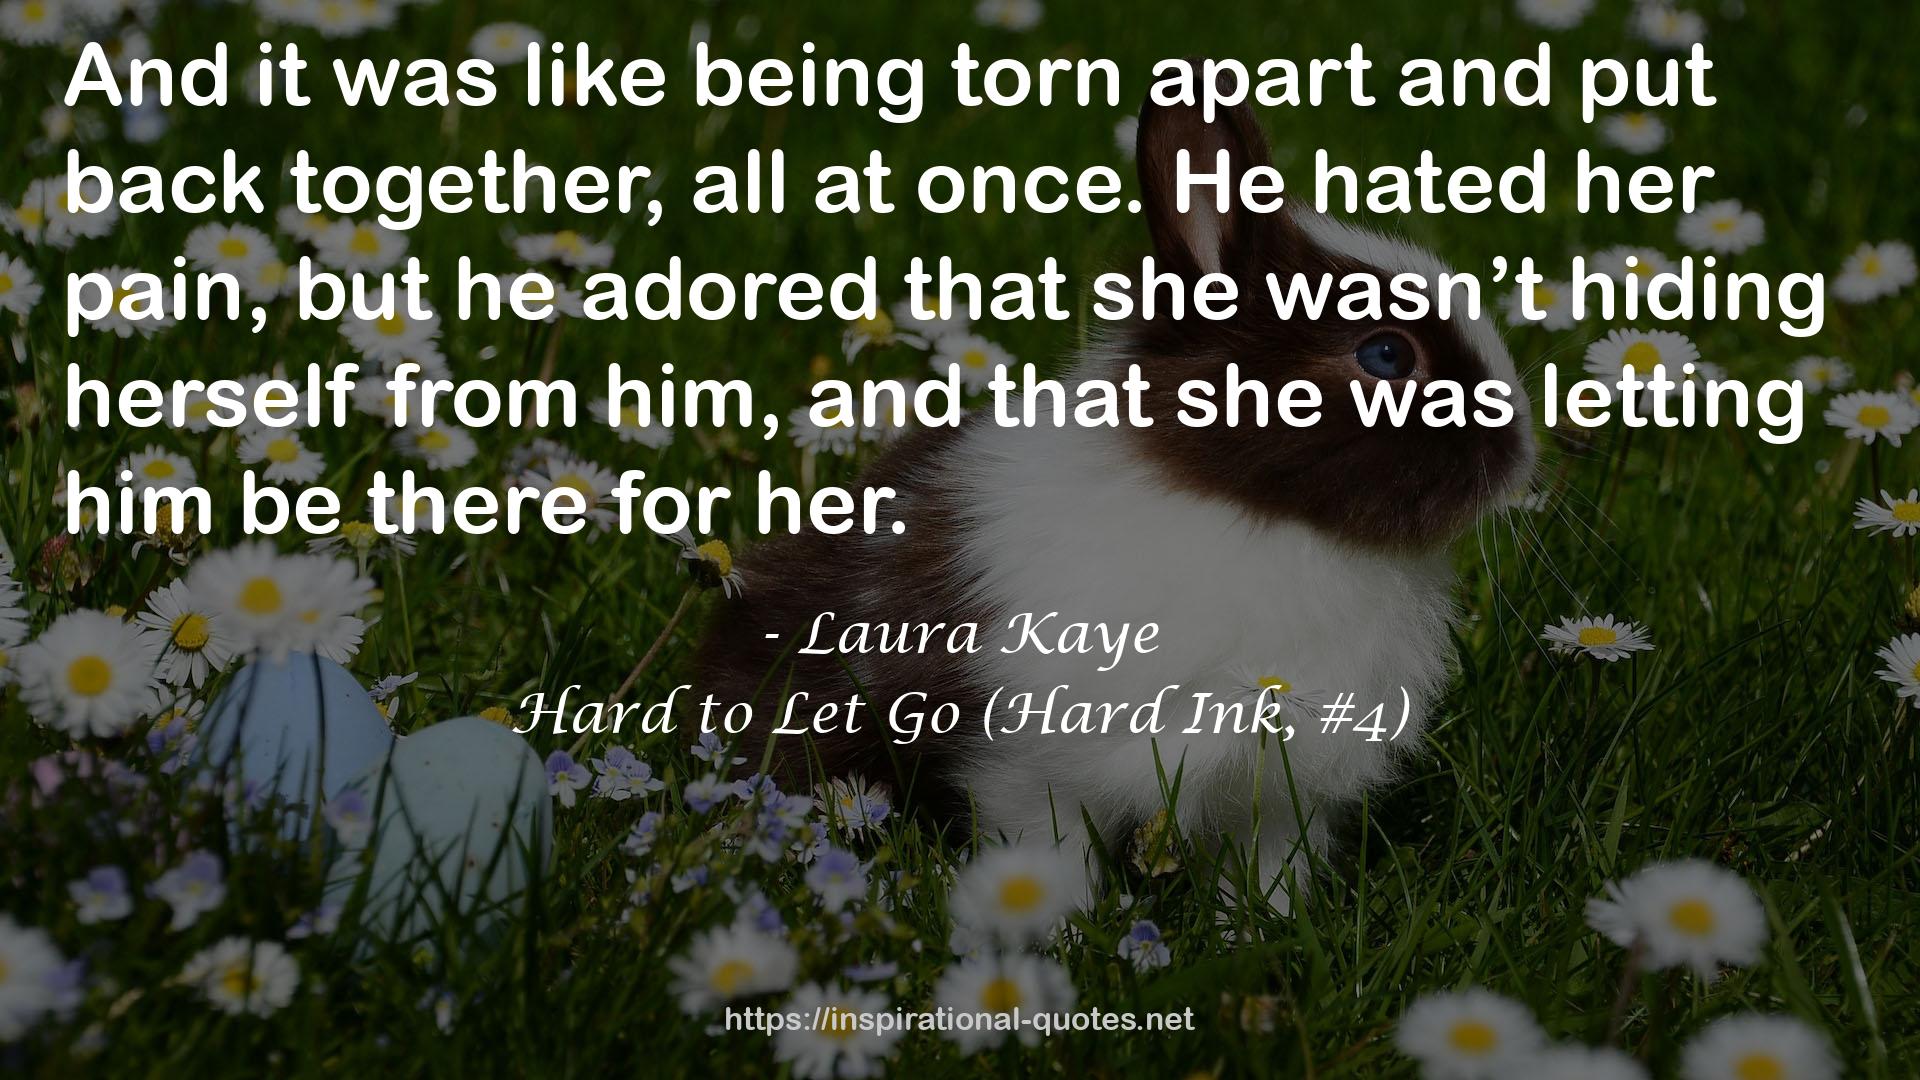 Hard to Let Go (Hard Ink, #4) QUOTES